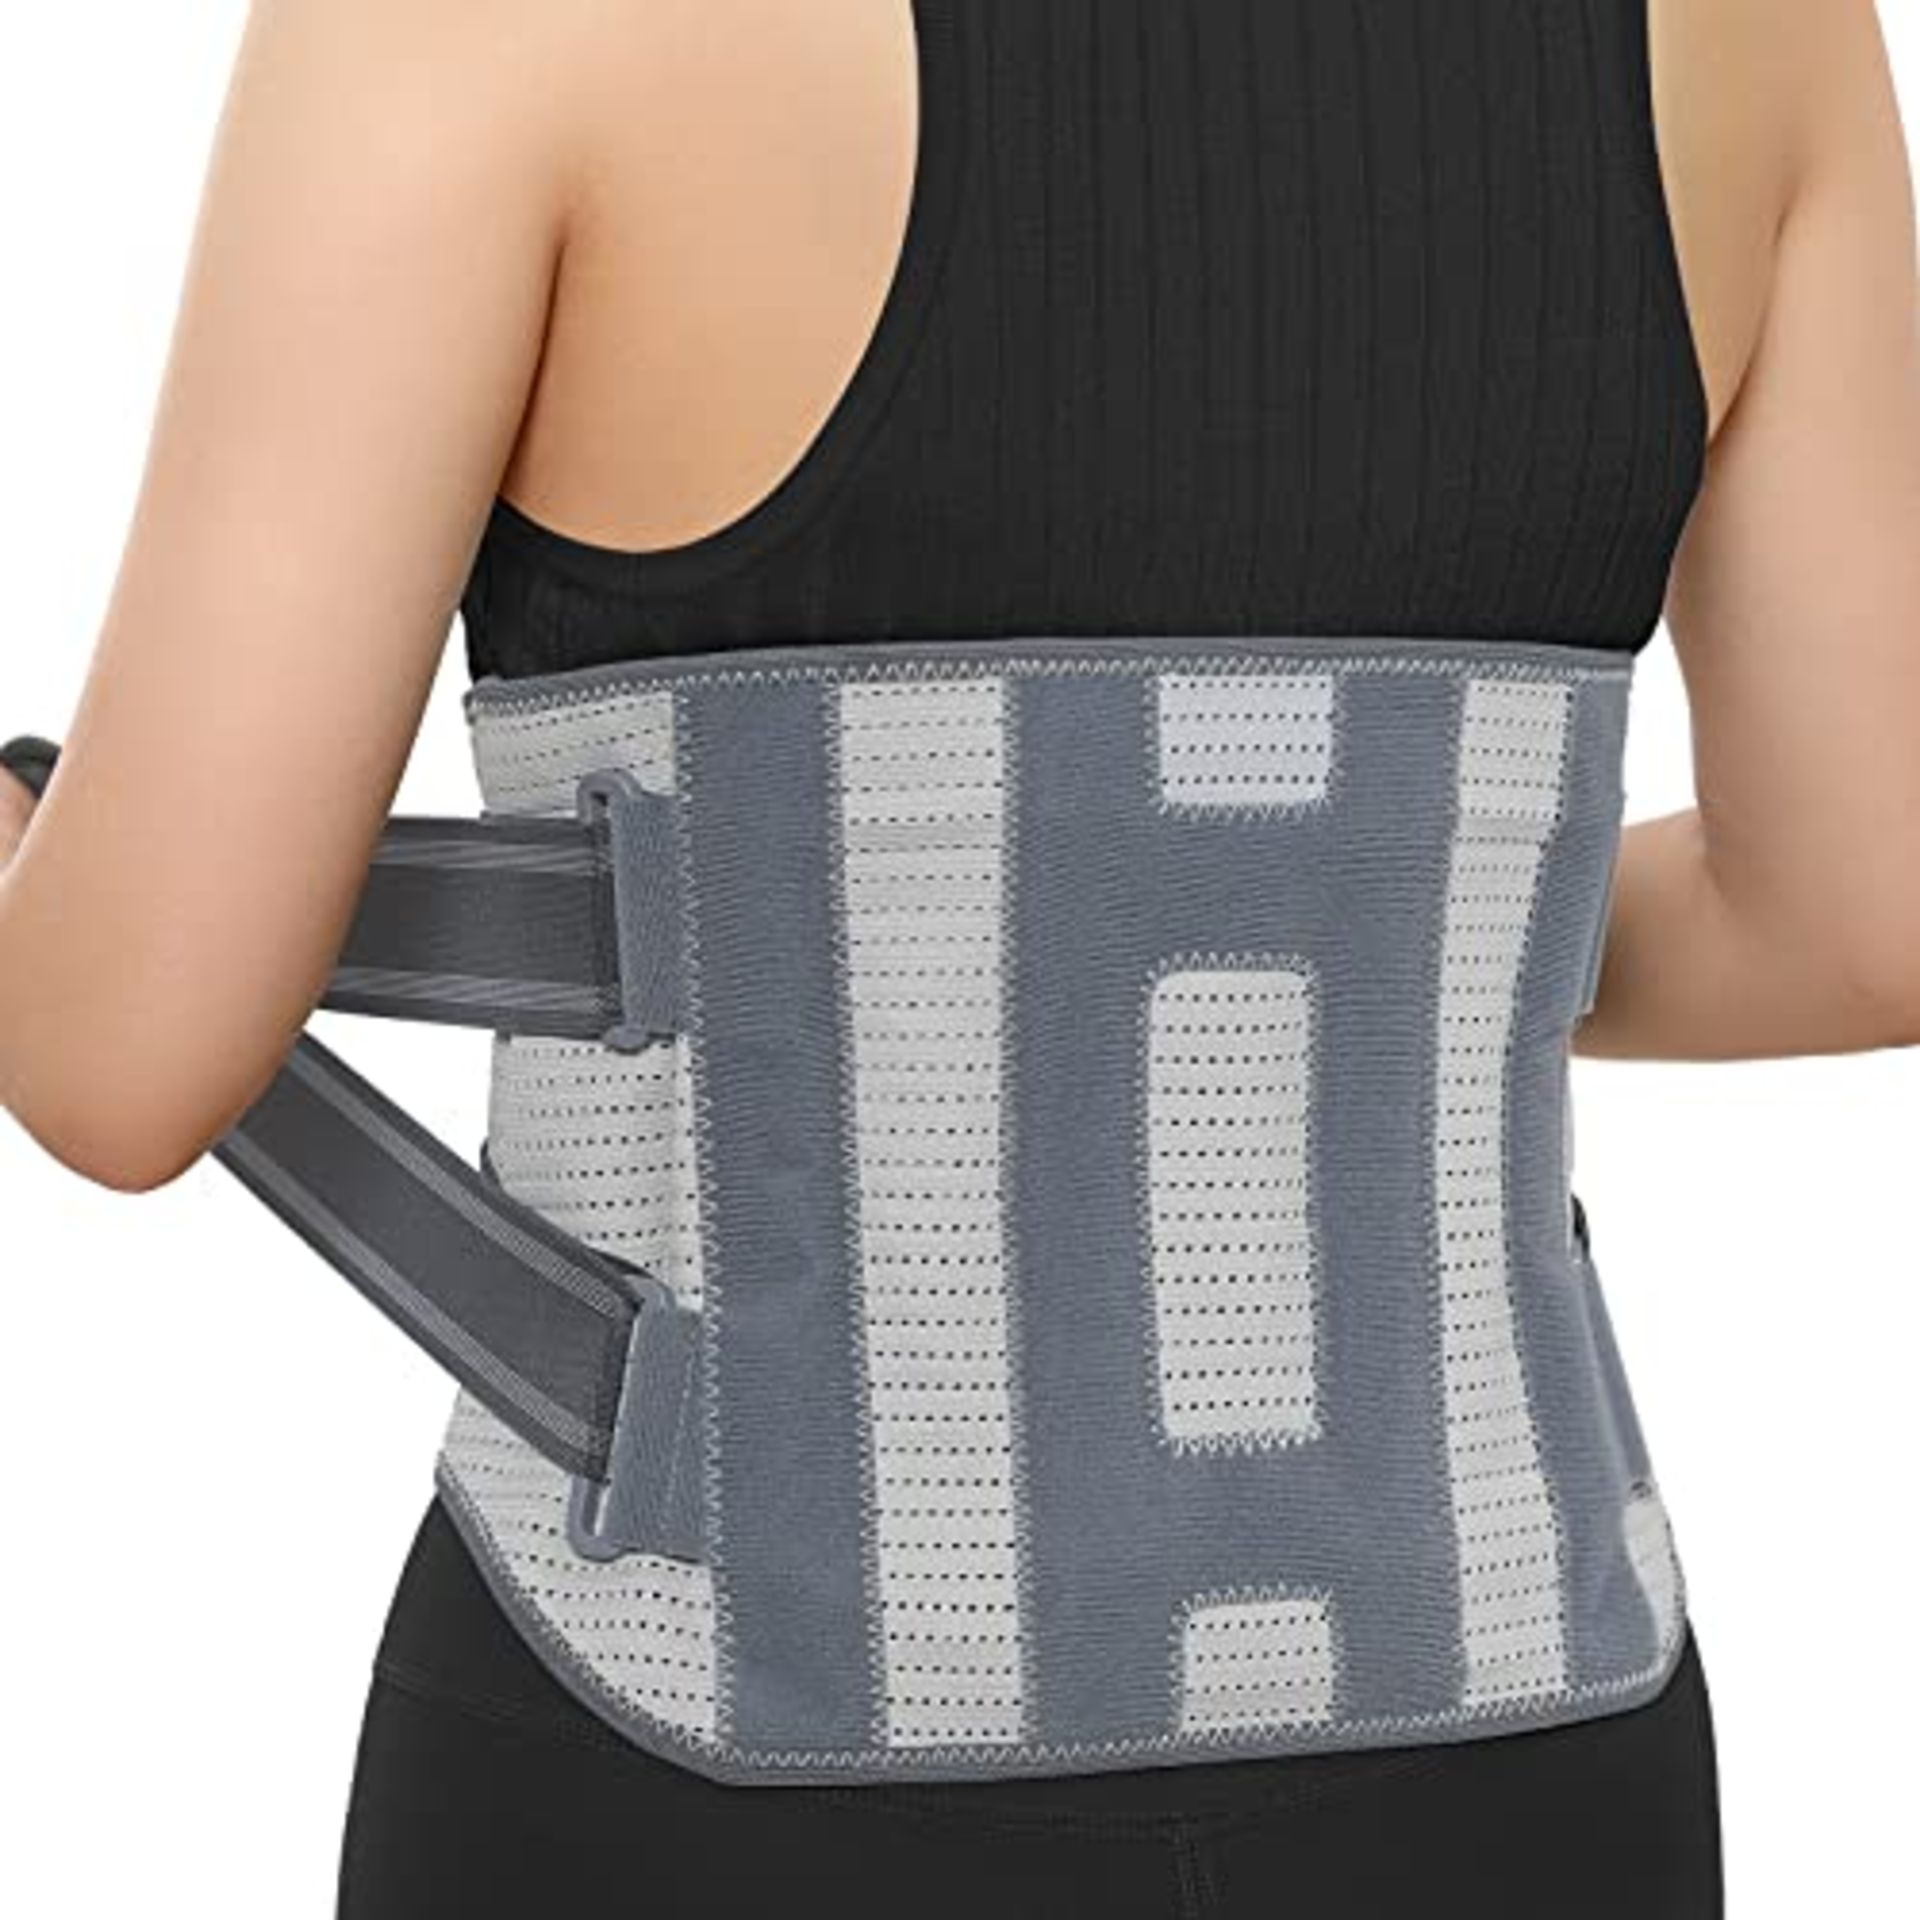 ABYON Back Support Belt for Men and Women, Air Mesh Adjustable and Breathable Lower Ba - Image 5 of 8